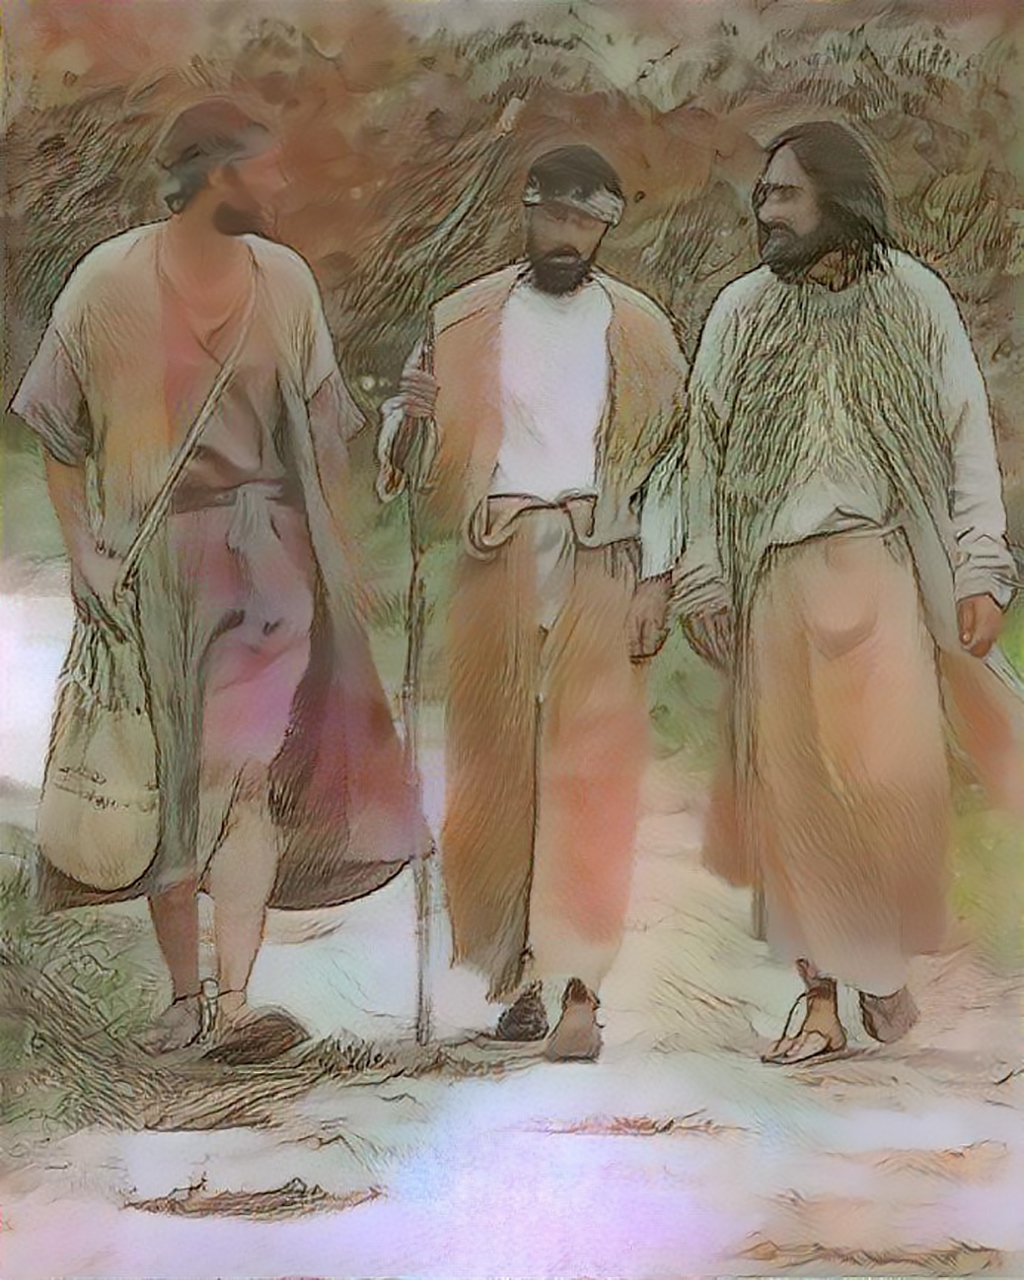 They are joined by Jesus and the three are now walking and conversing together.